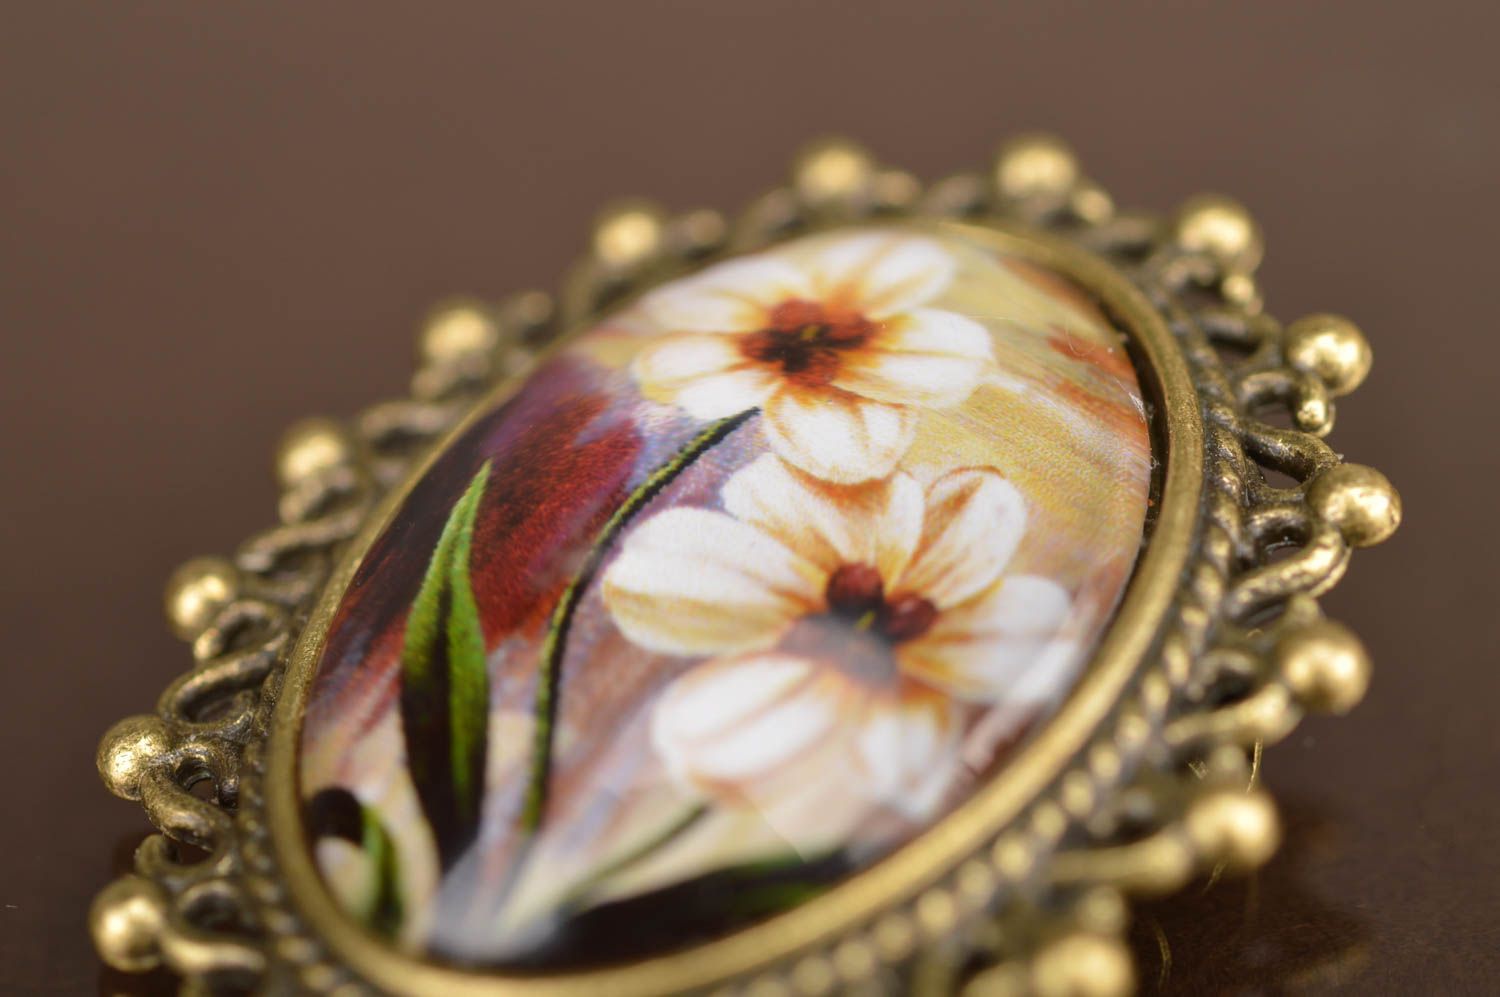 Handmade beautiful oval brooch in vintage style with flowers in dark shades photo 4